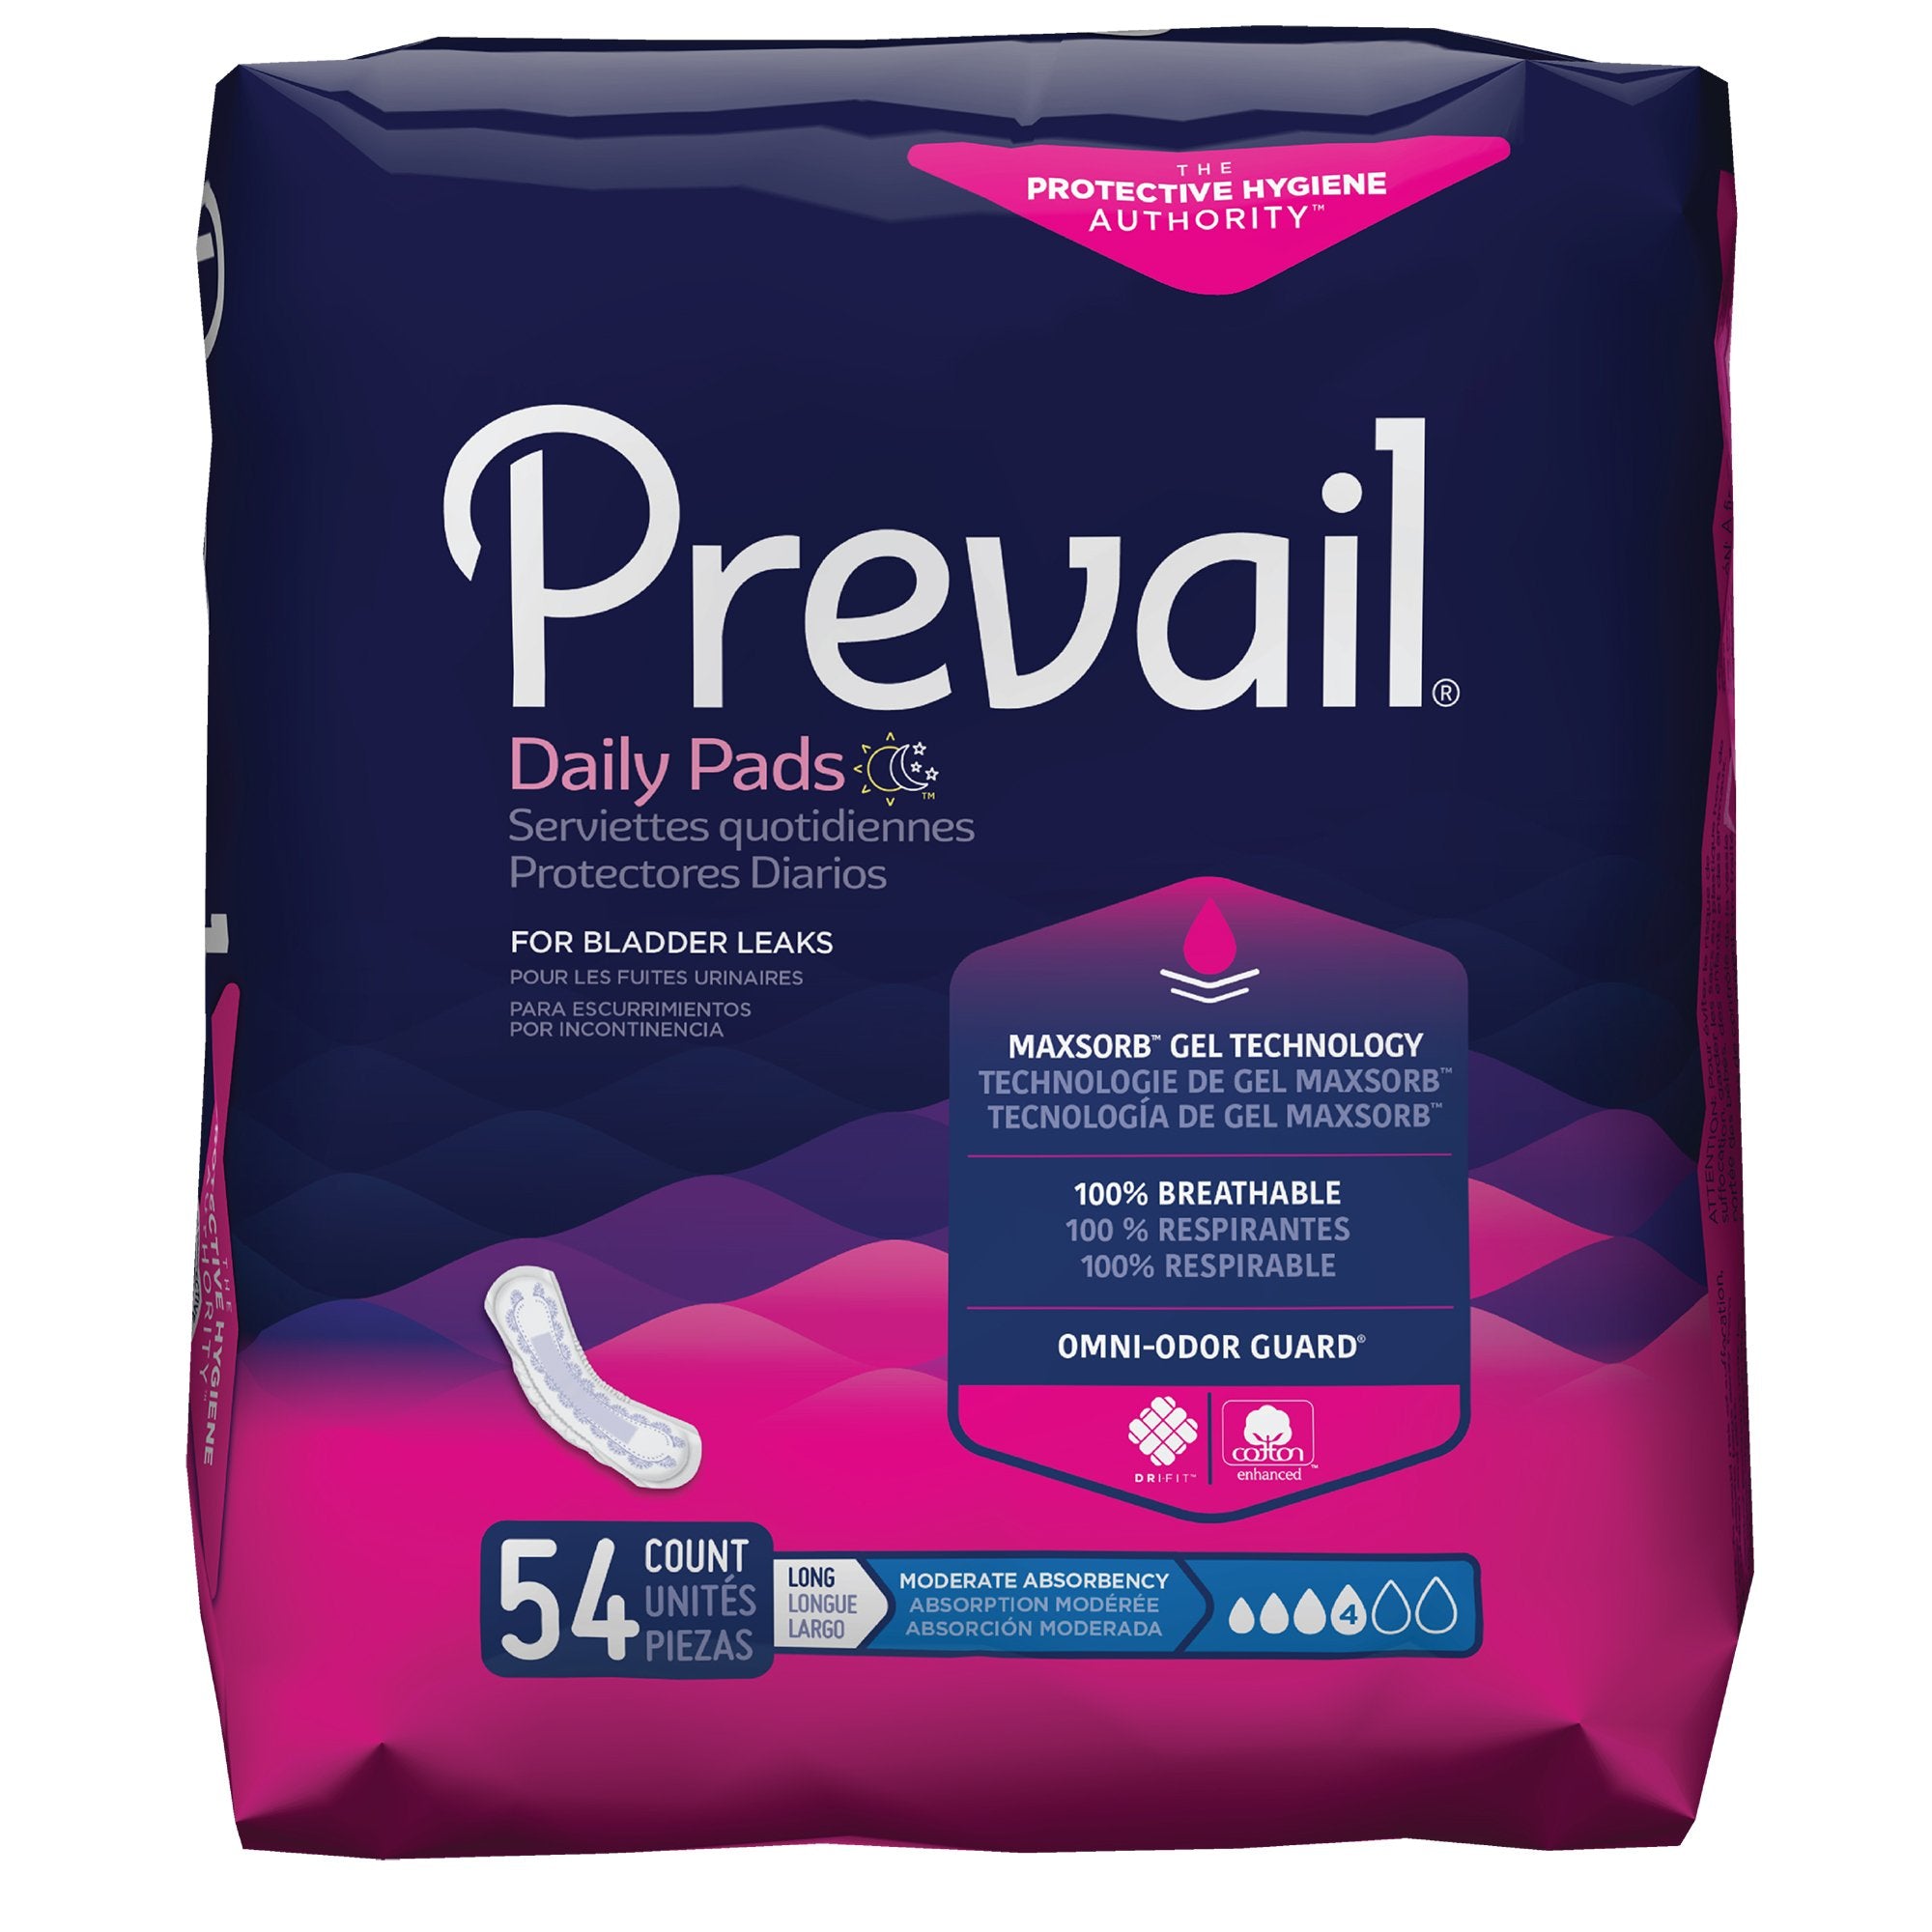 Bladder Control Pad Prevail Daily Pads 11 Inch Length Moderate Absorbency Polymer Core One Size Fits Most